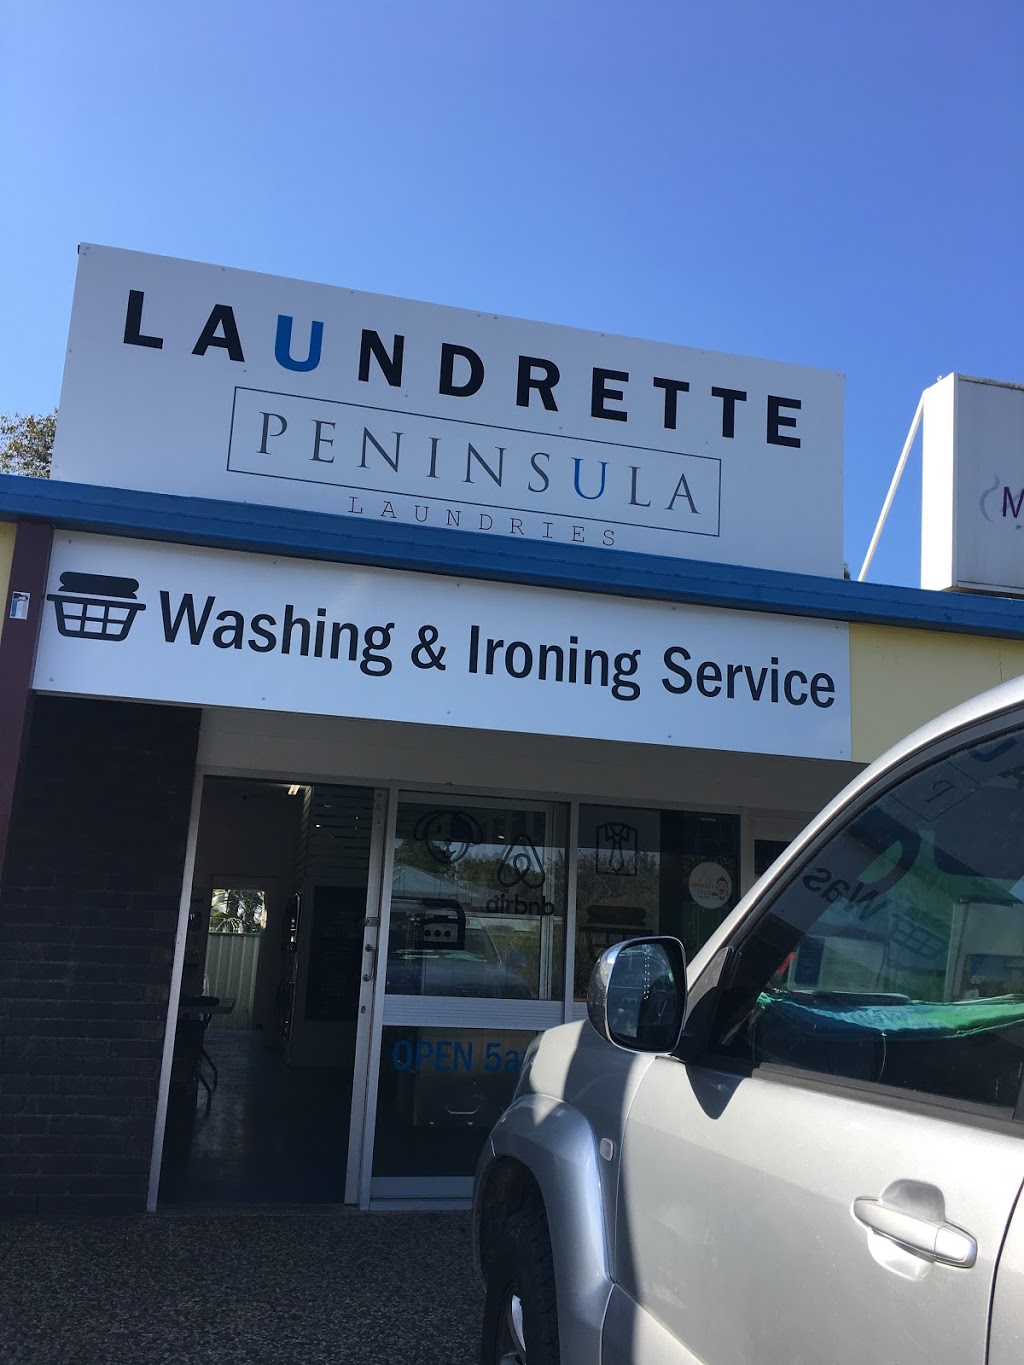 Peninsula Laundries Woody Point | laundry | 2/56 King St, Woody Point QLD 4019, Australia | 0419031954 OR +61 419 031 954